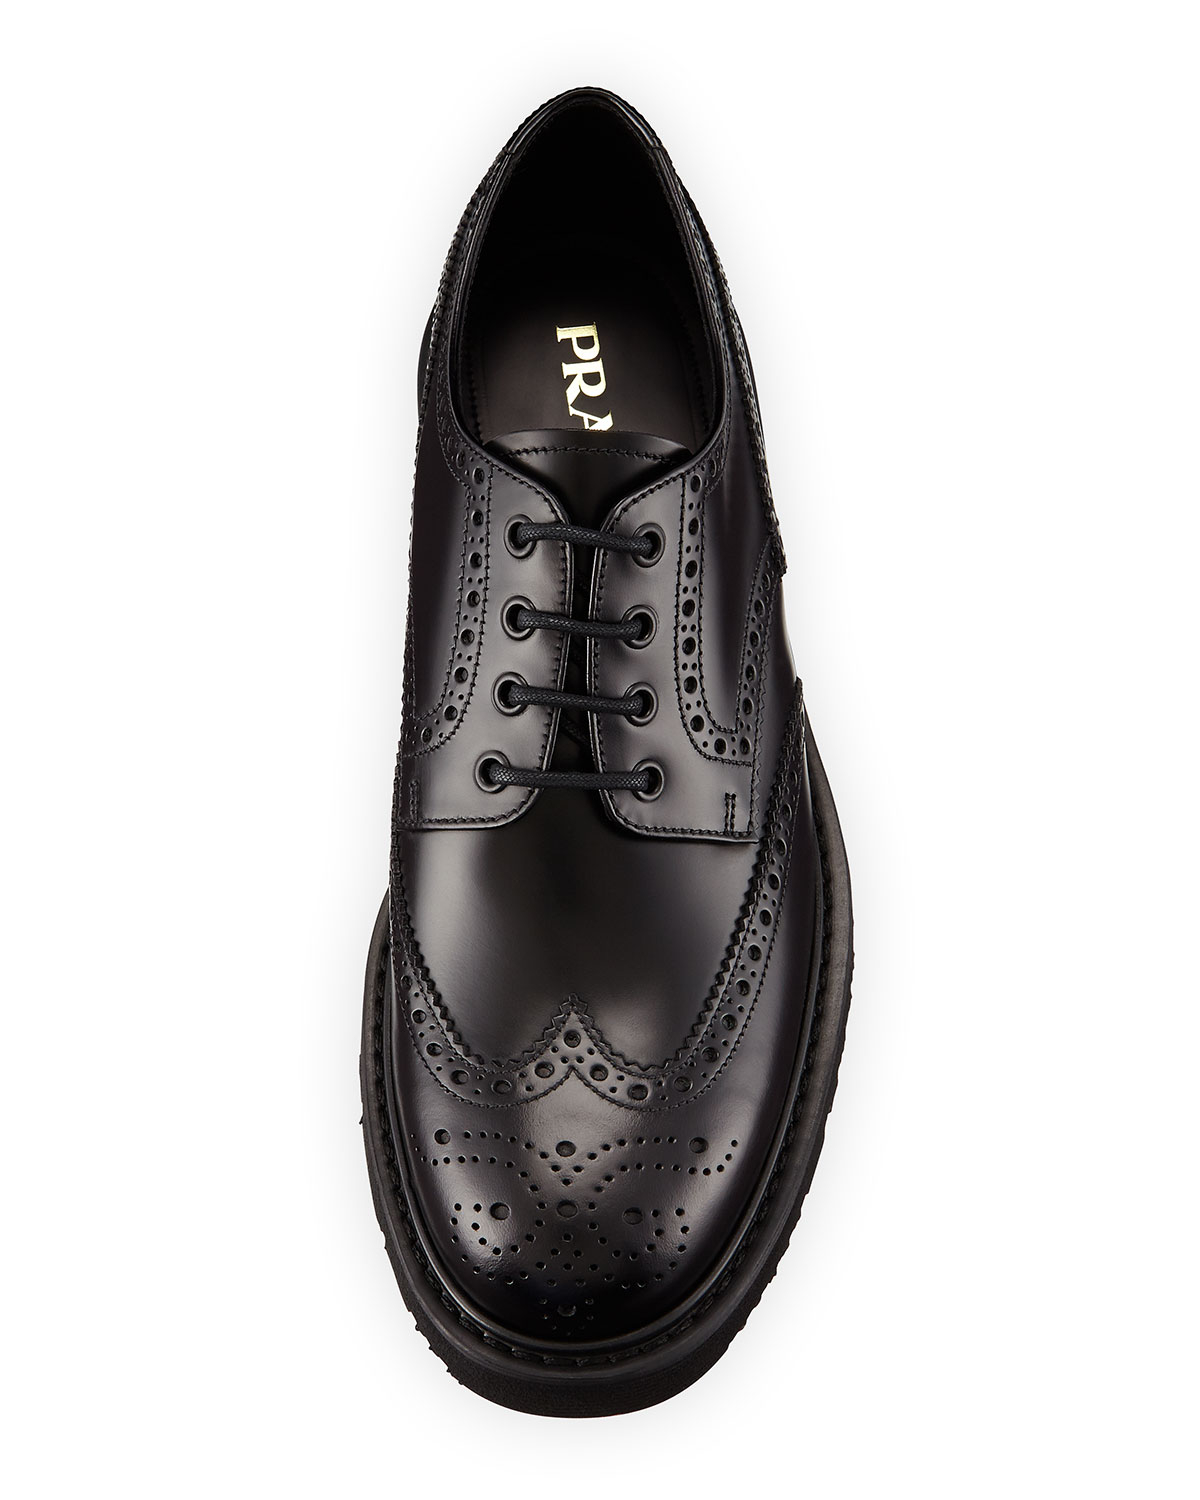 Lyst - Prada Rubber-Sole Wing-Tip Derby Shoes in Black